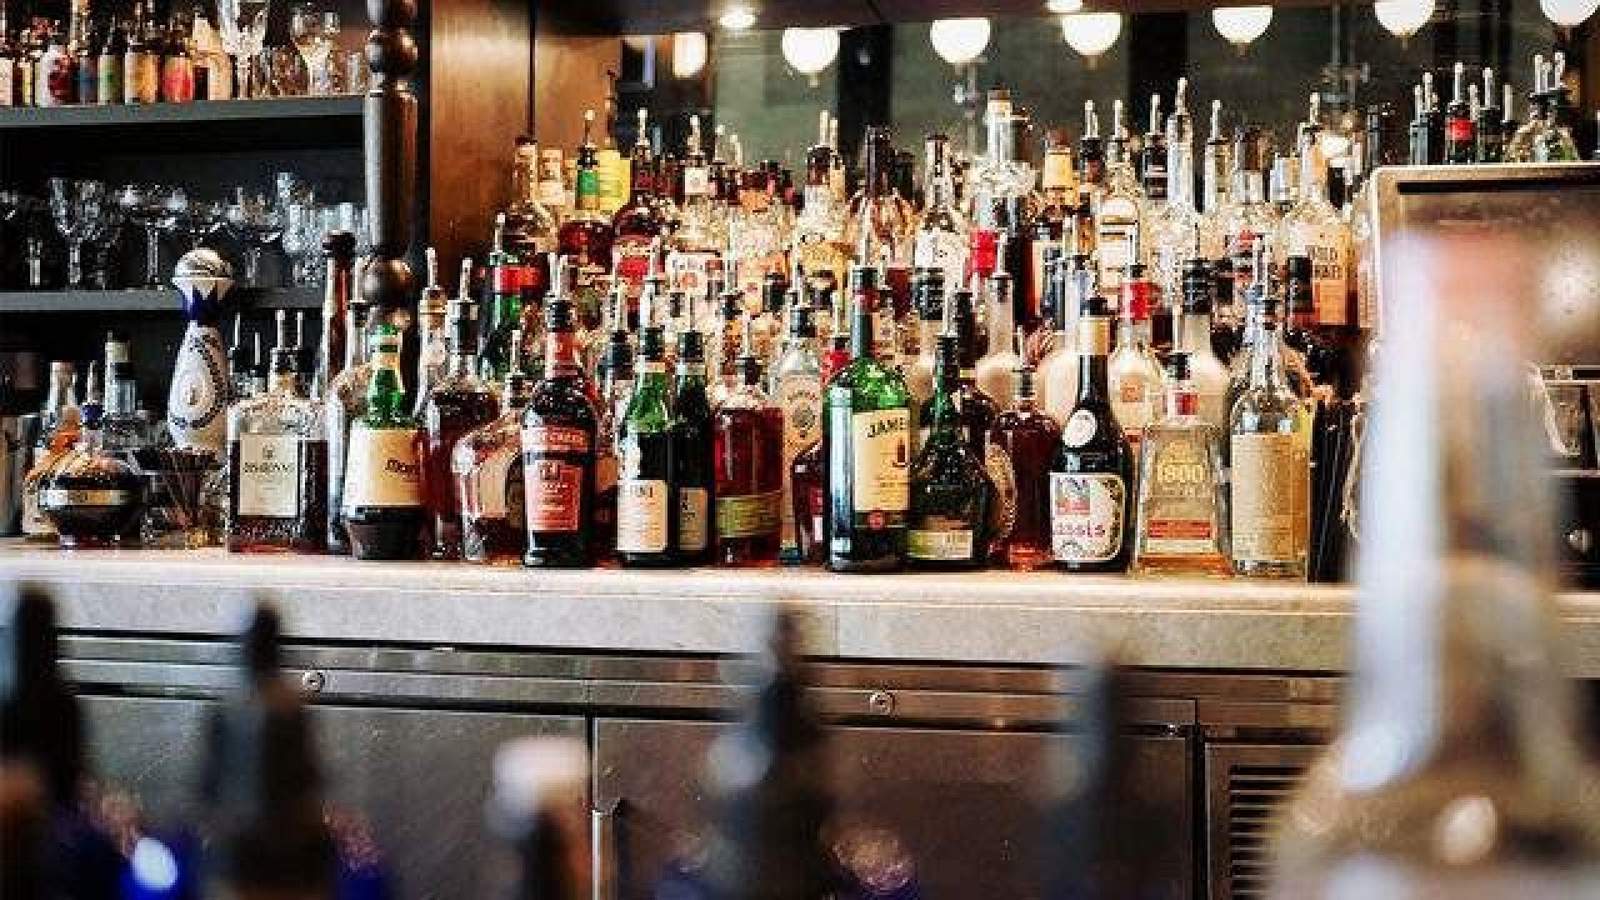 ‘Just another hit for us’: Thanksgiving weekend curfew could be another setback for reopened bars, business owners say